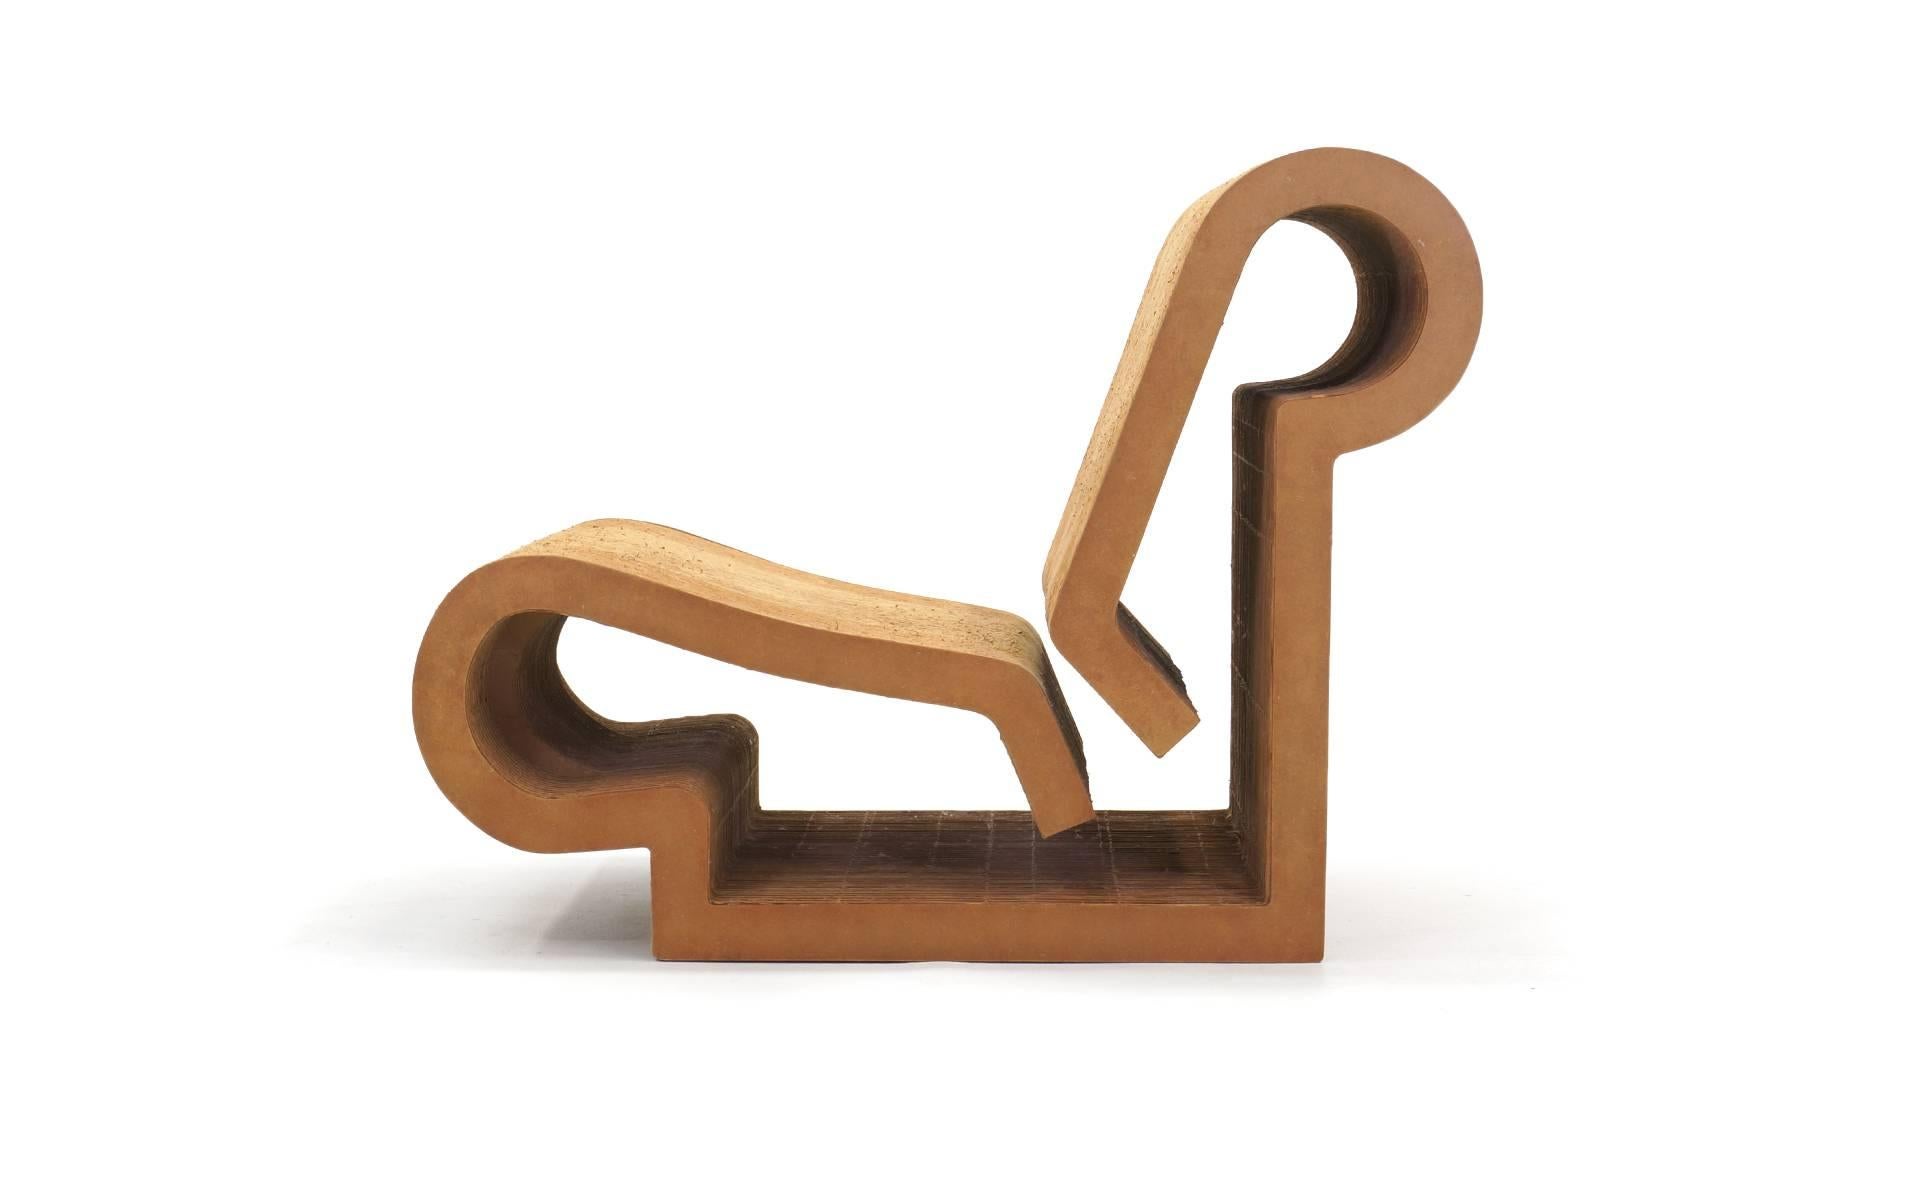 Iconic, original contour chair designed by Frank Gehry for easy edges. Made of Industrial corrugated cardboard and masonite.